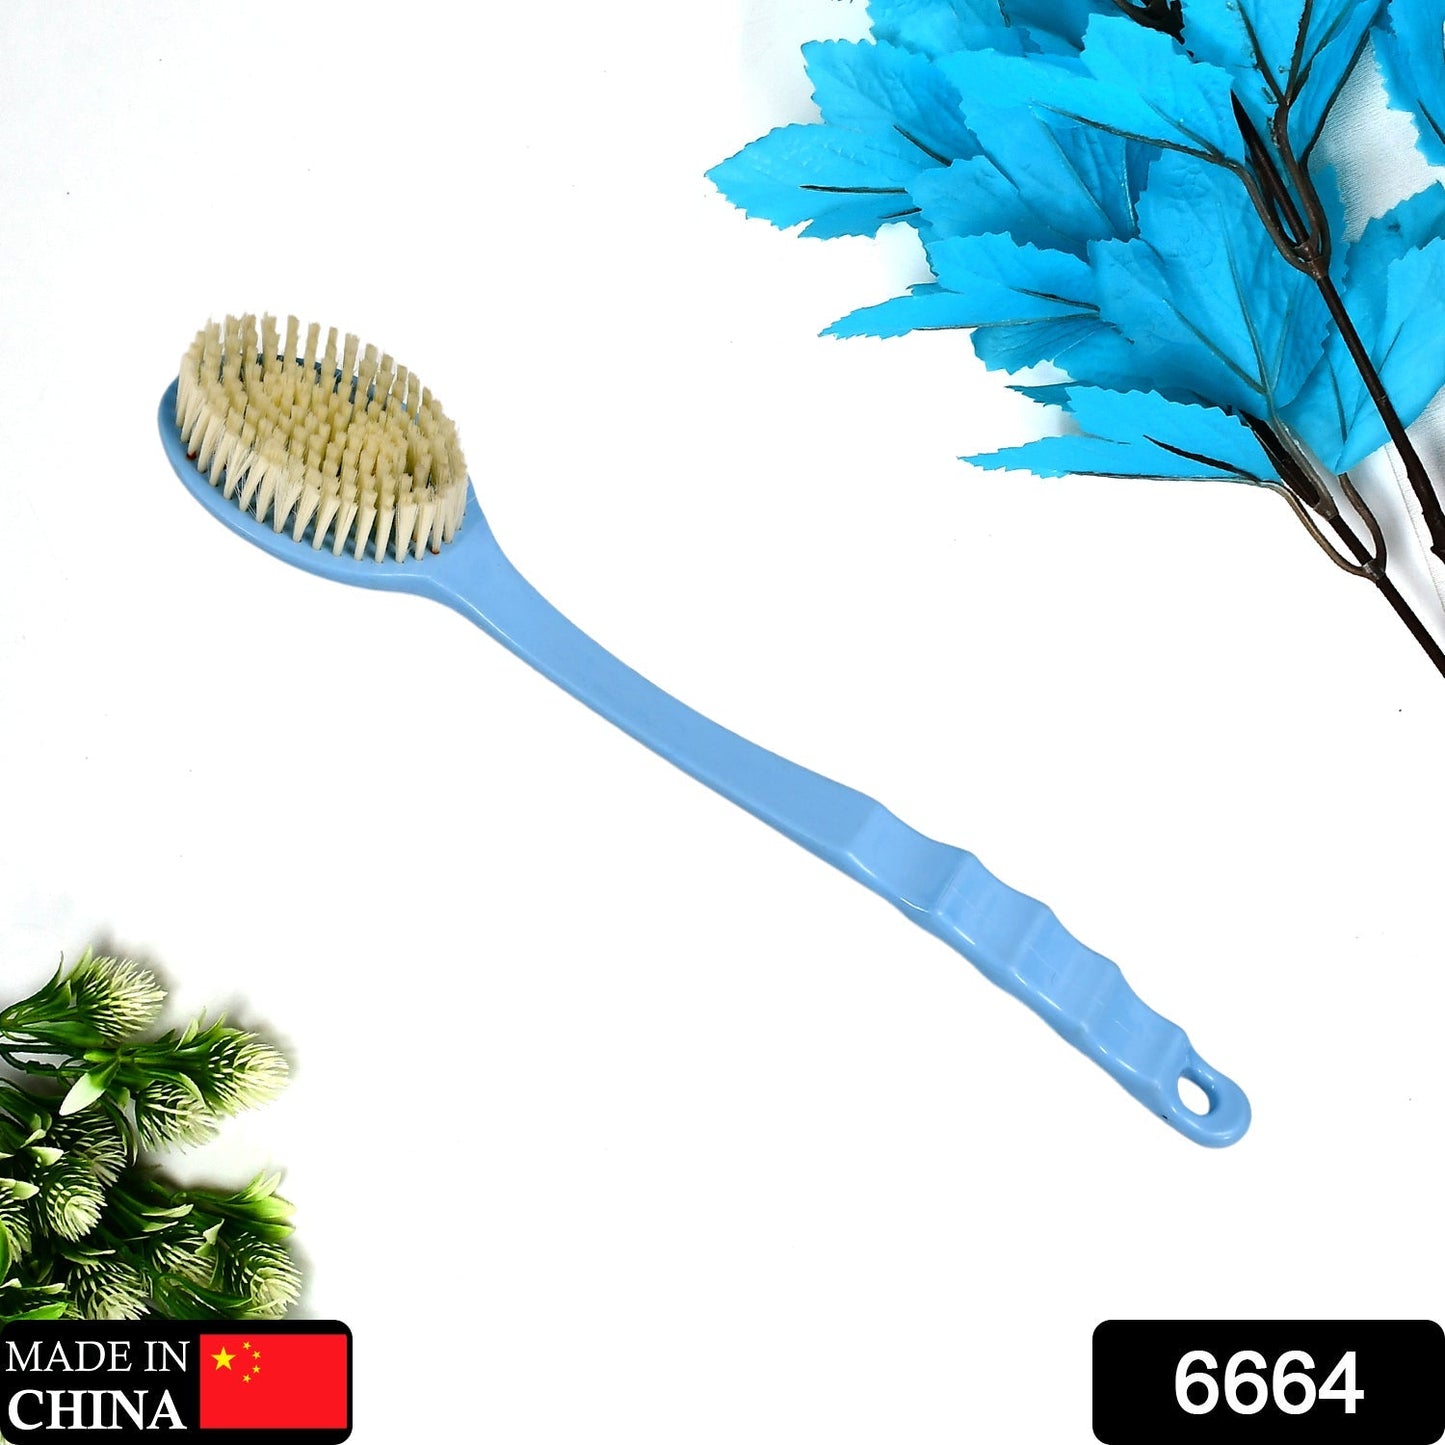 6664 Bath Brush with Bristles, Long Handle for Exfoliating Back, Body, and Feet, Bath and Shower DeoDap